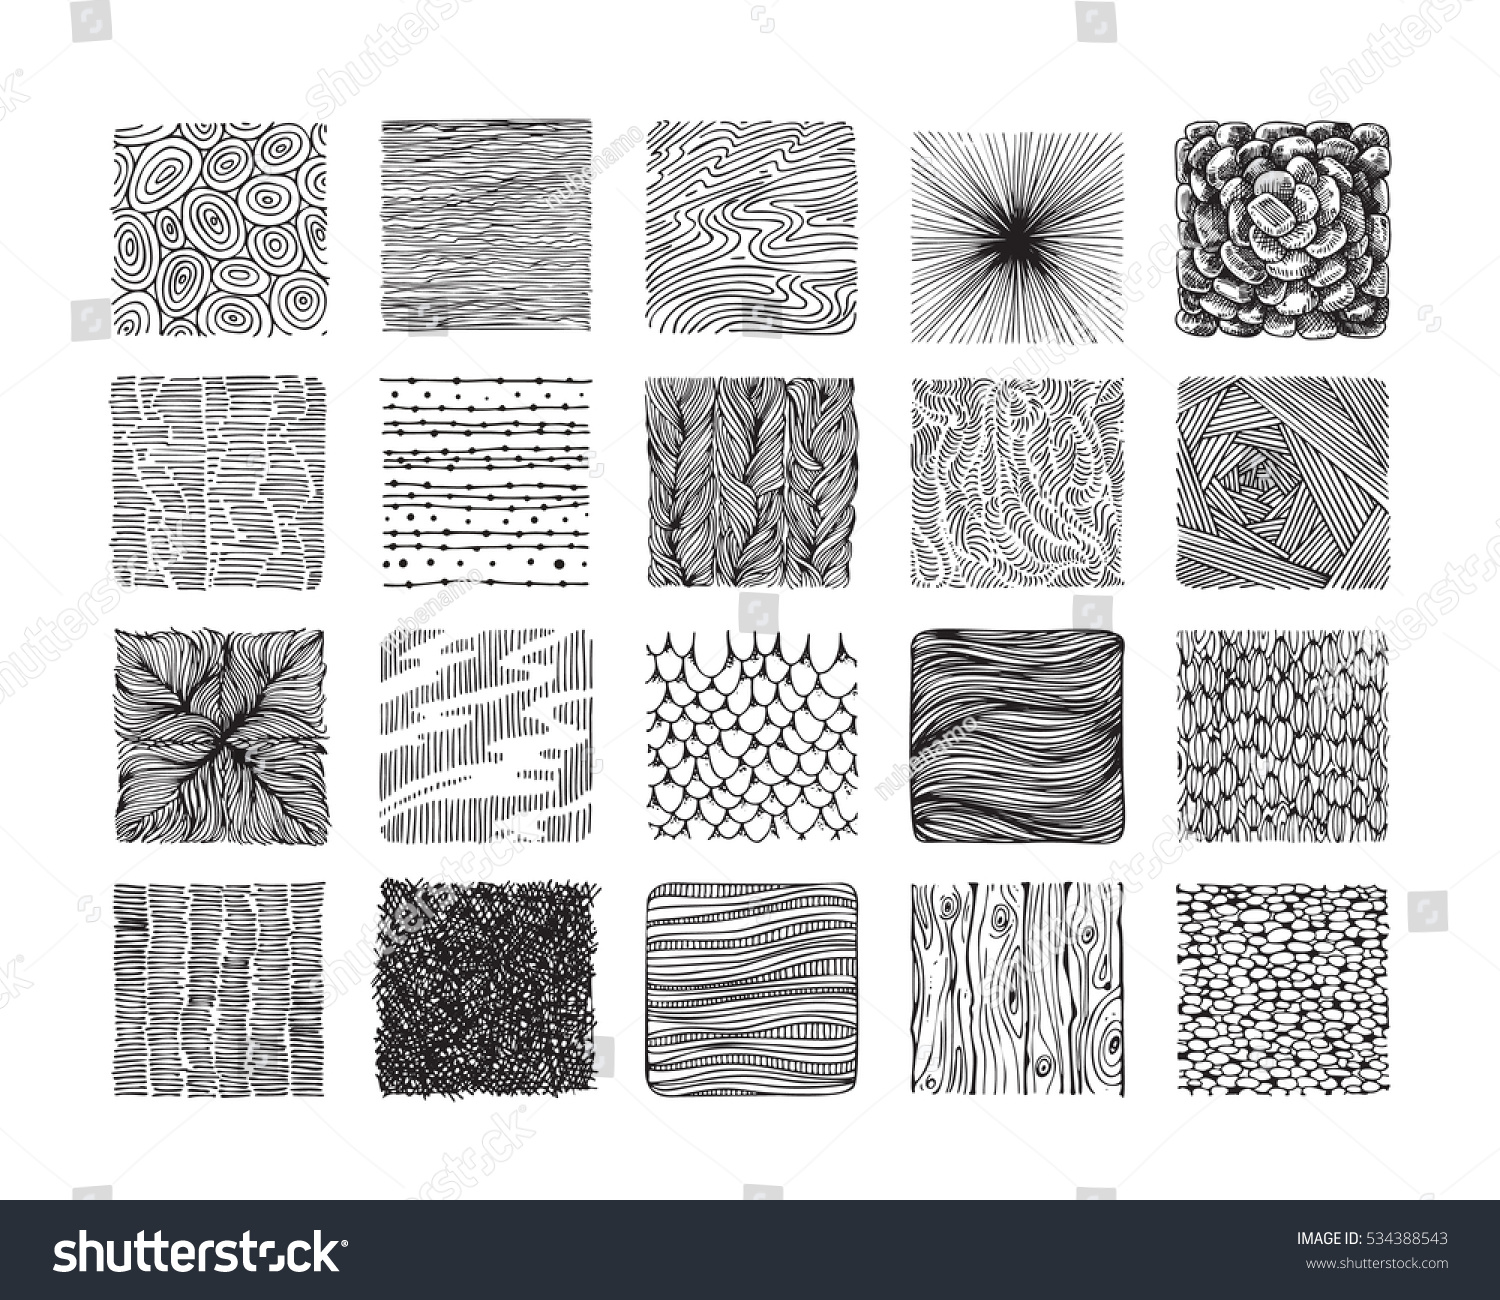 Hand drawn textures and brushes. Big artistic collection of design elements: graphic patterns, natural ornaments, wavy lines, geometric symbols made with ink. Isolated vector set. #534388543